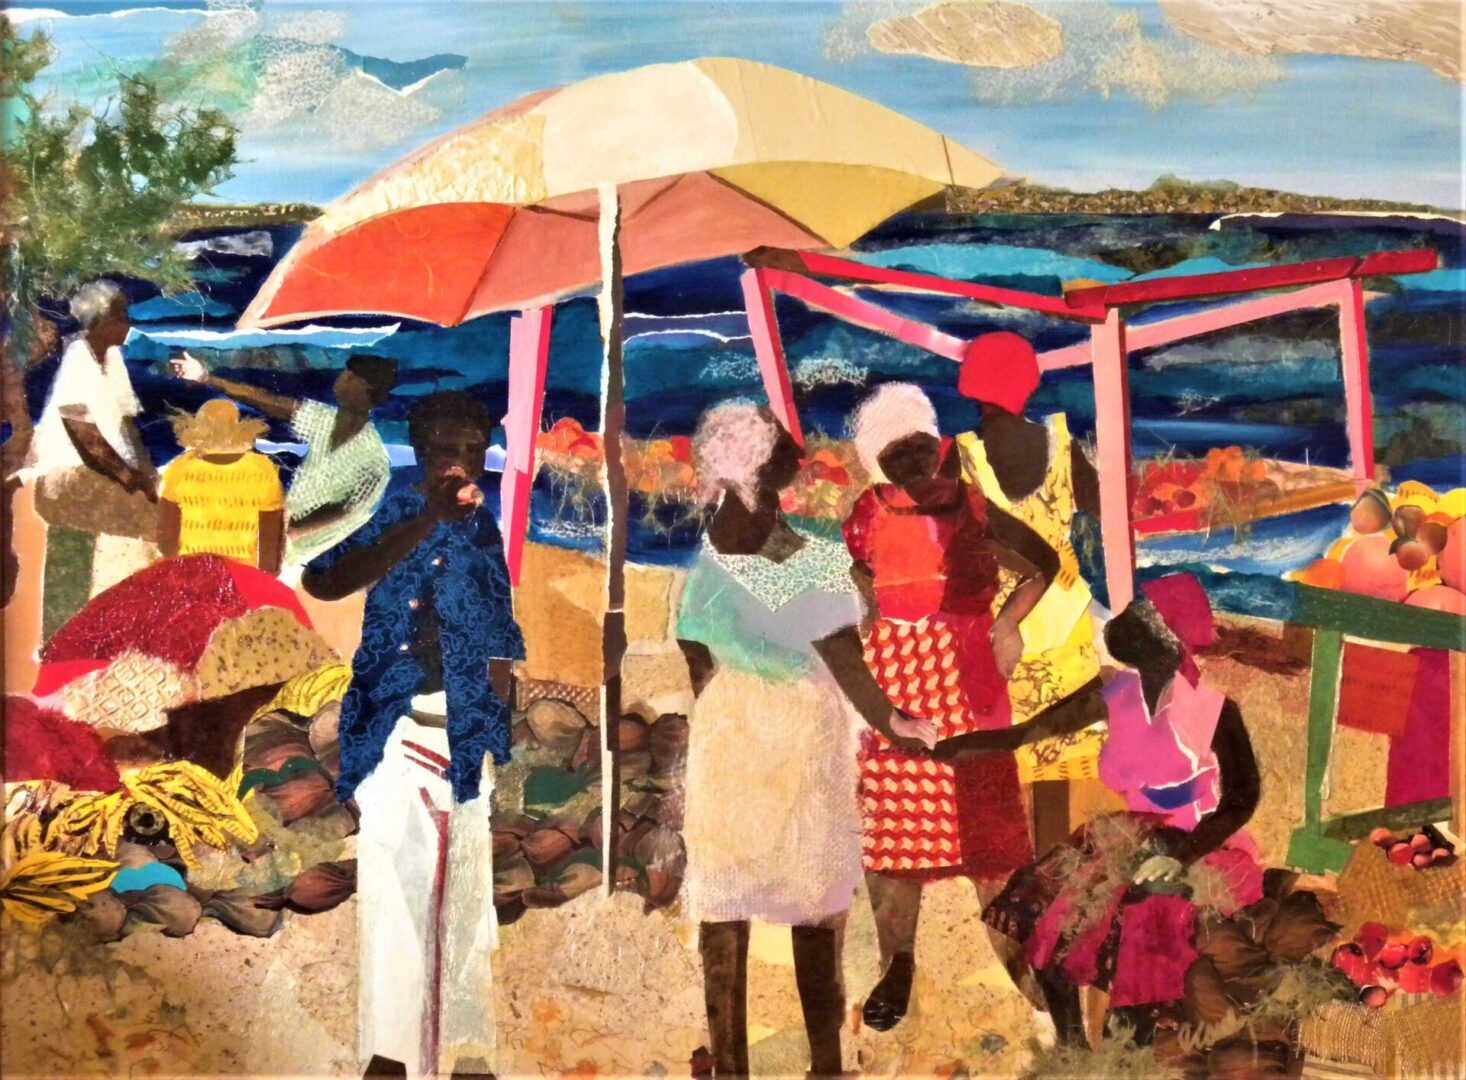 A painting of people on the beach under an umbrella